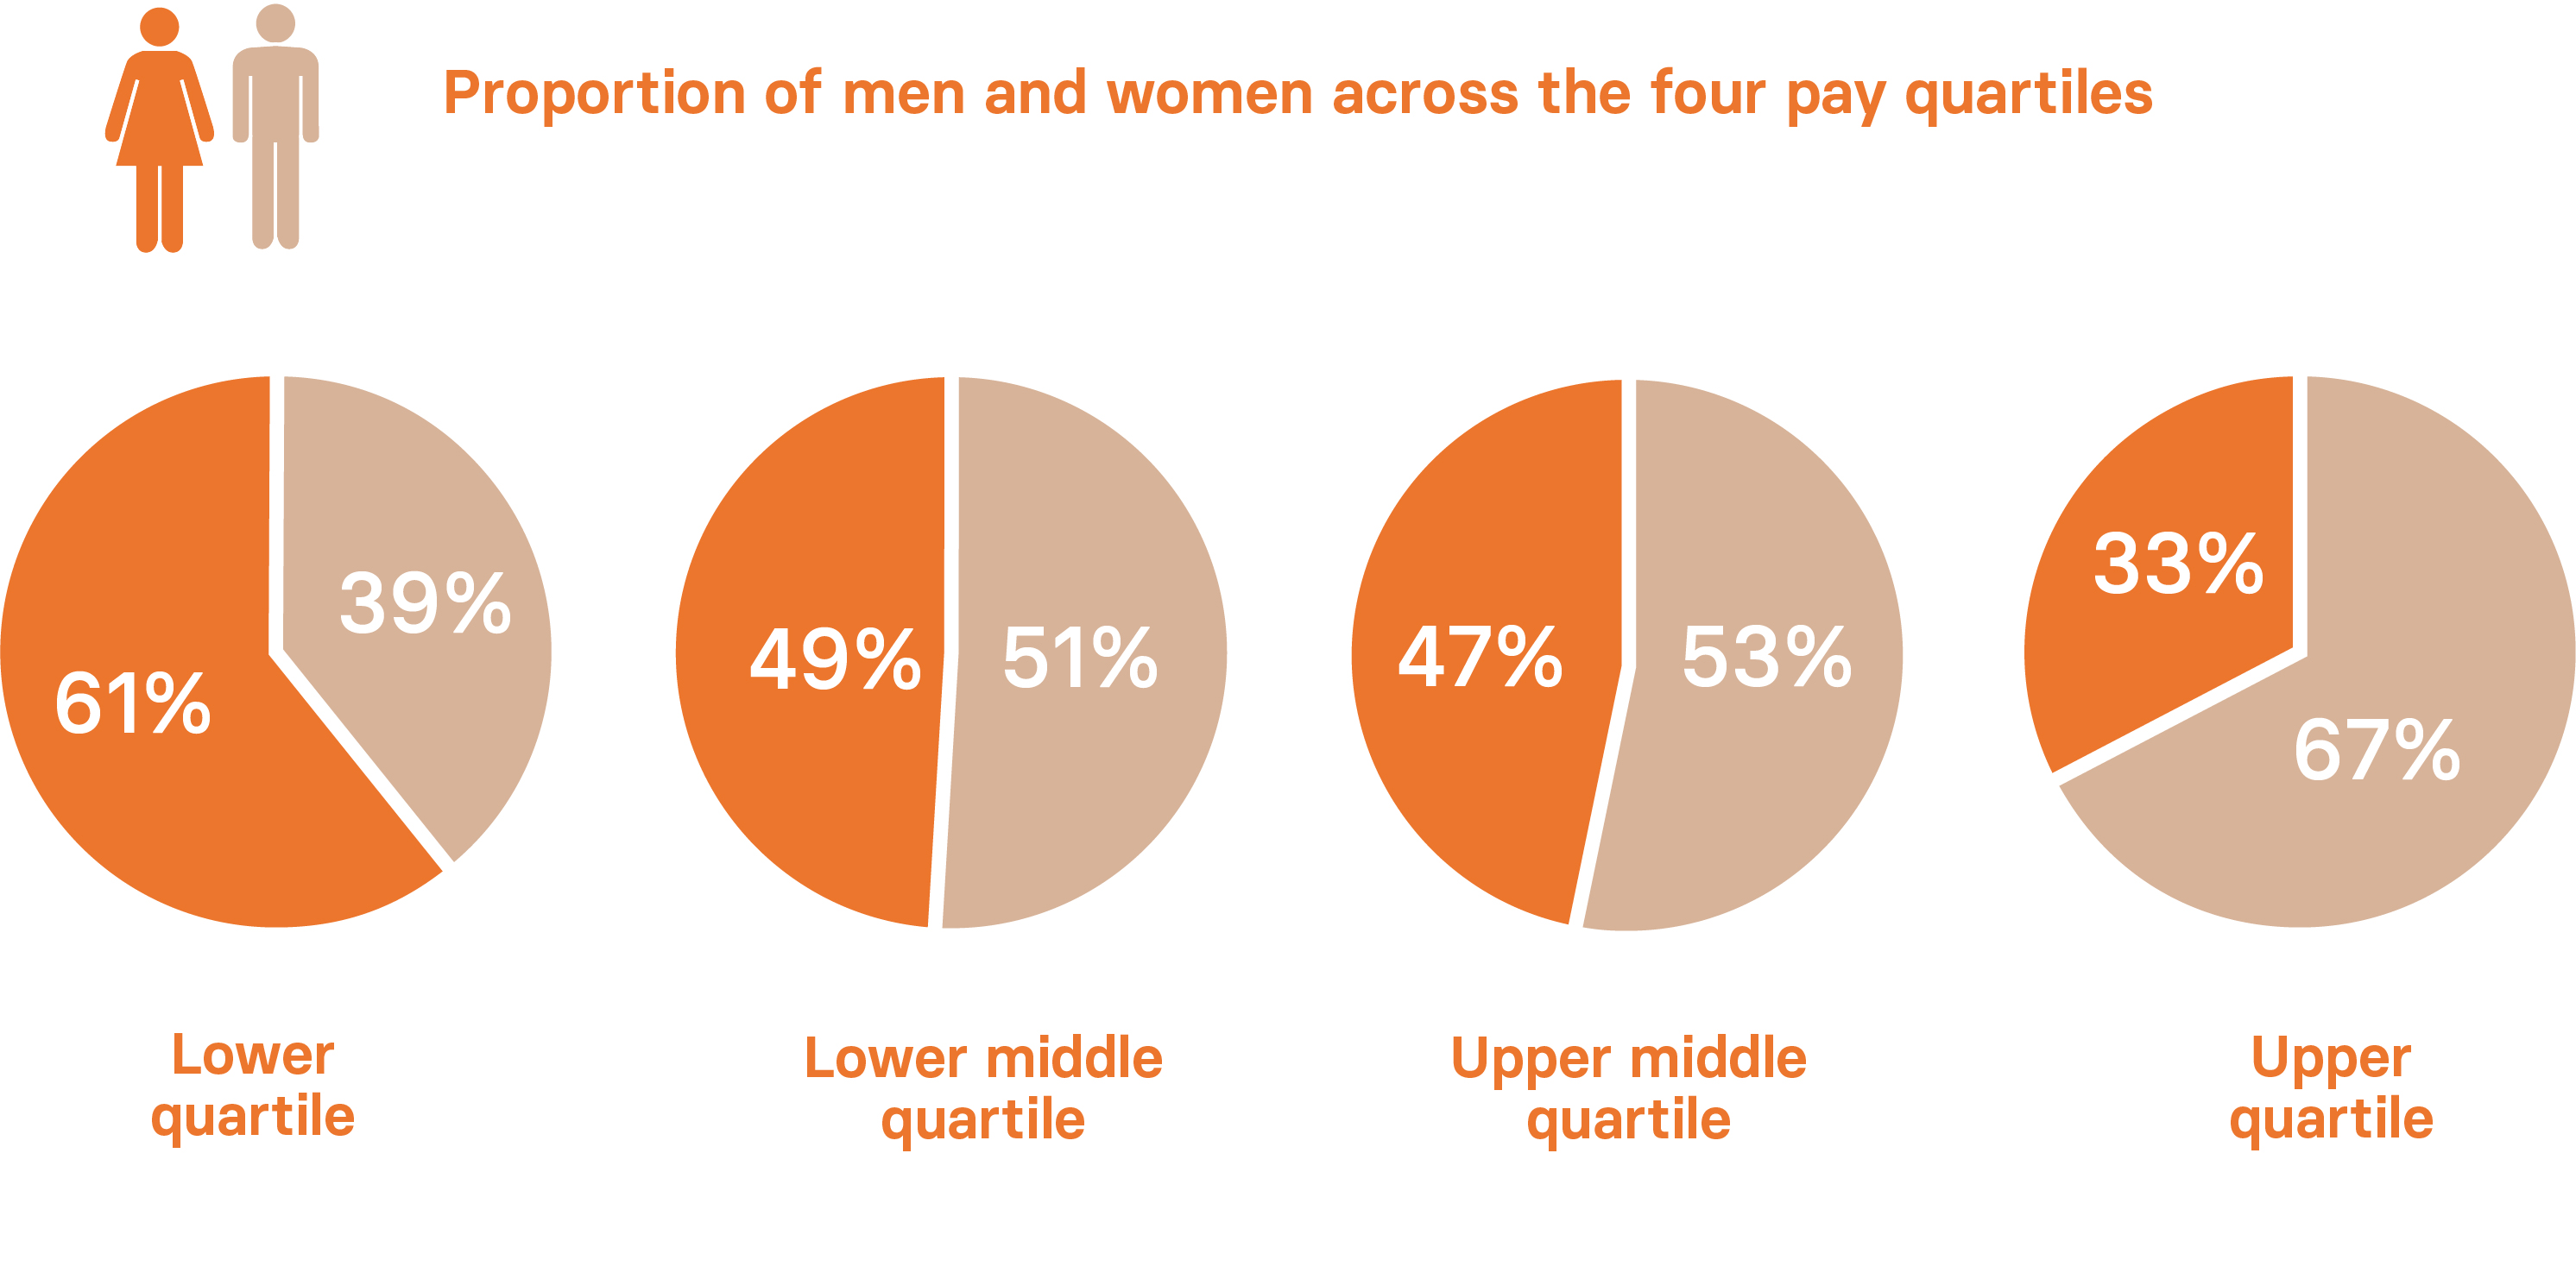 Image shows the proportion of men and women across the four pay quartiles